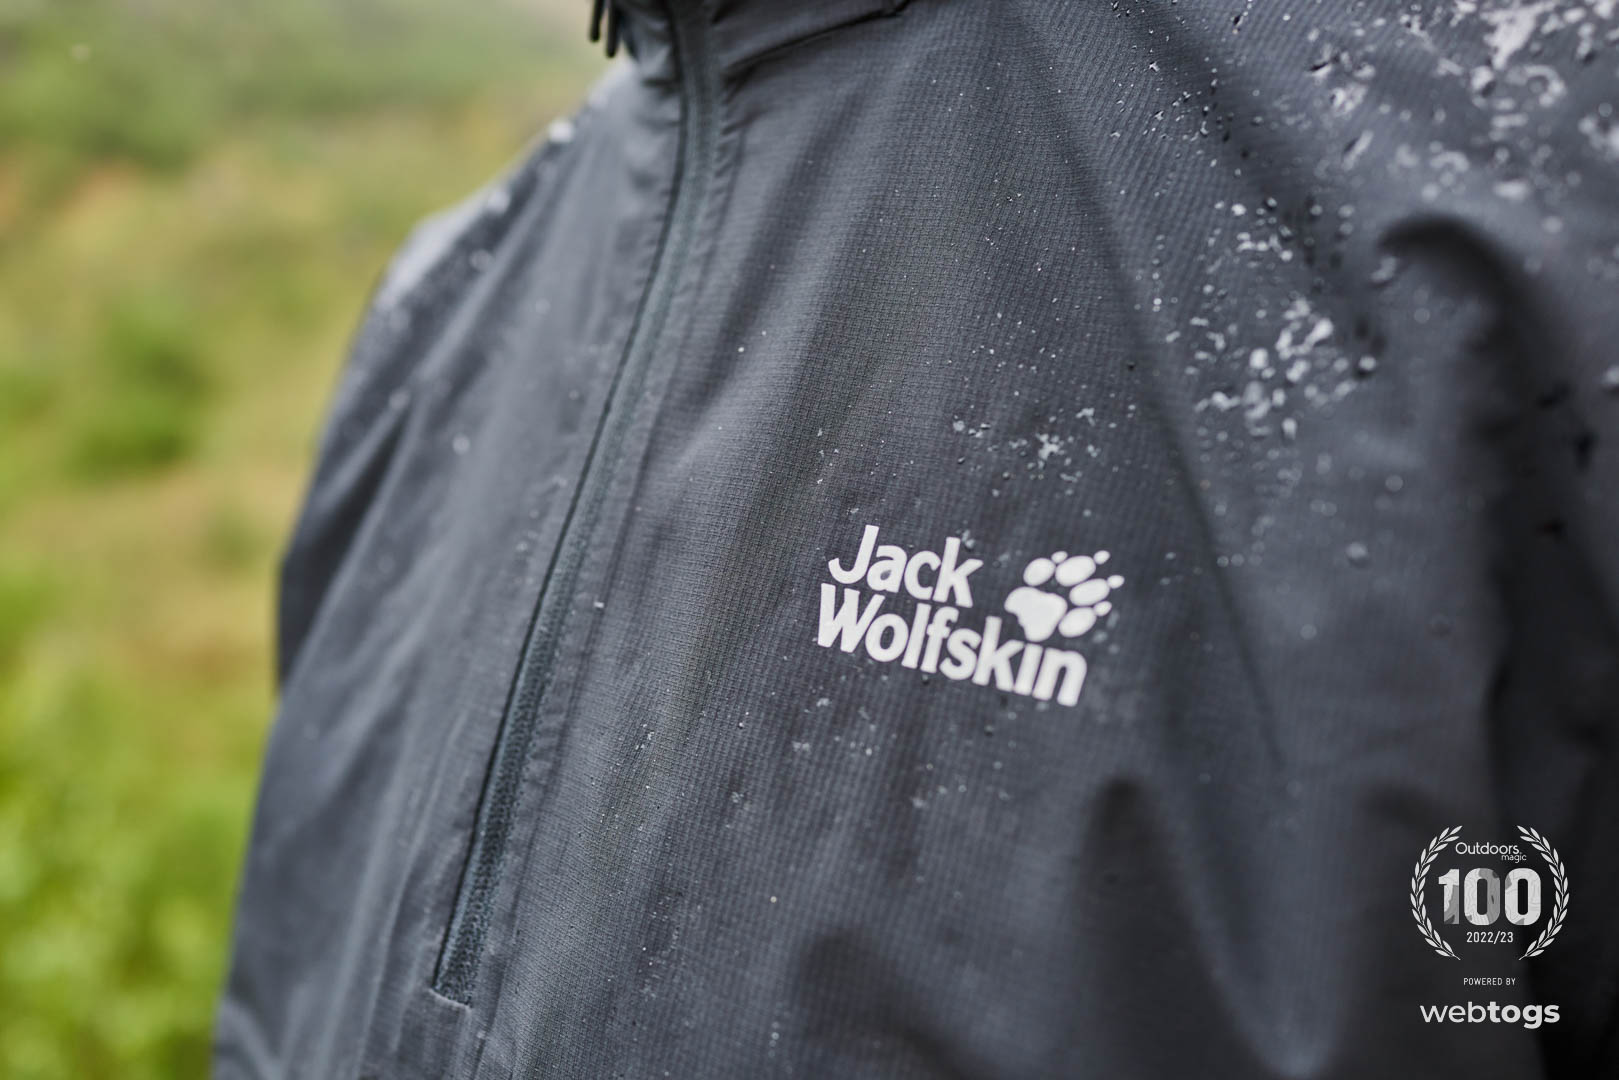 Jack Wolfskin Pack & Go Overhead Jacket | Review